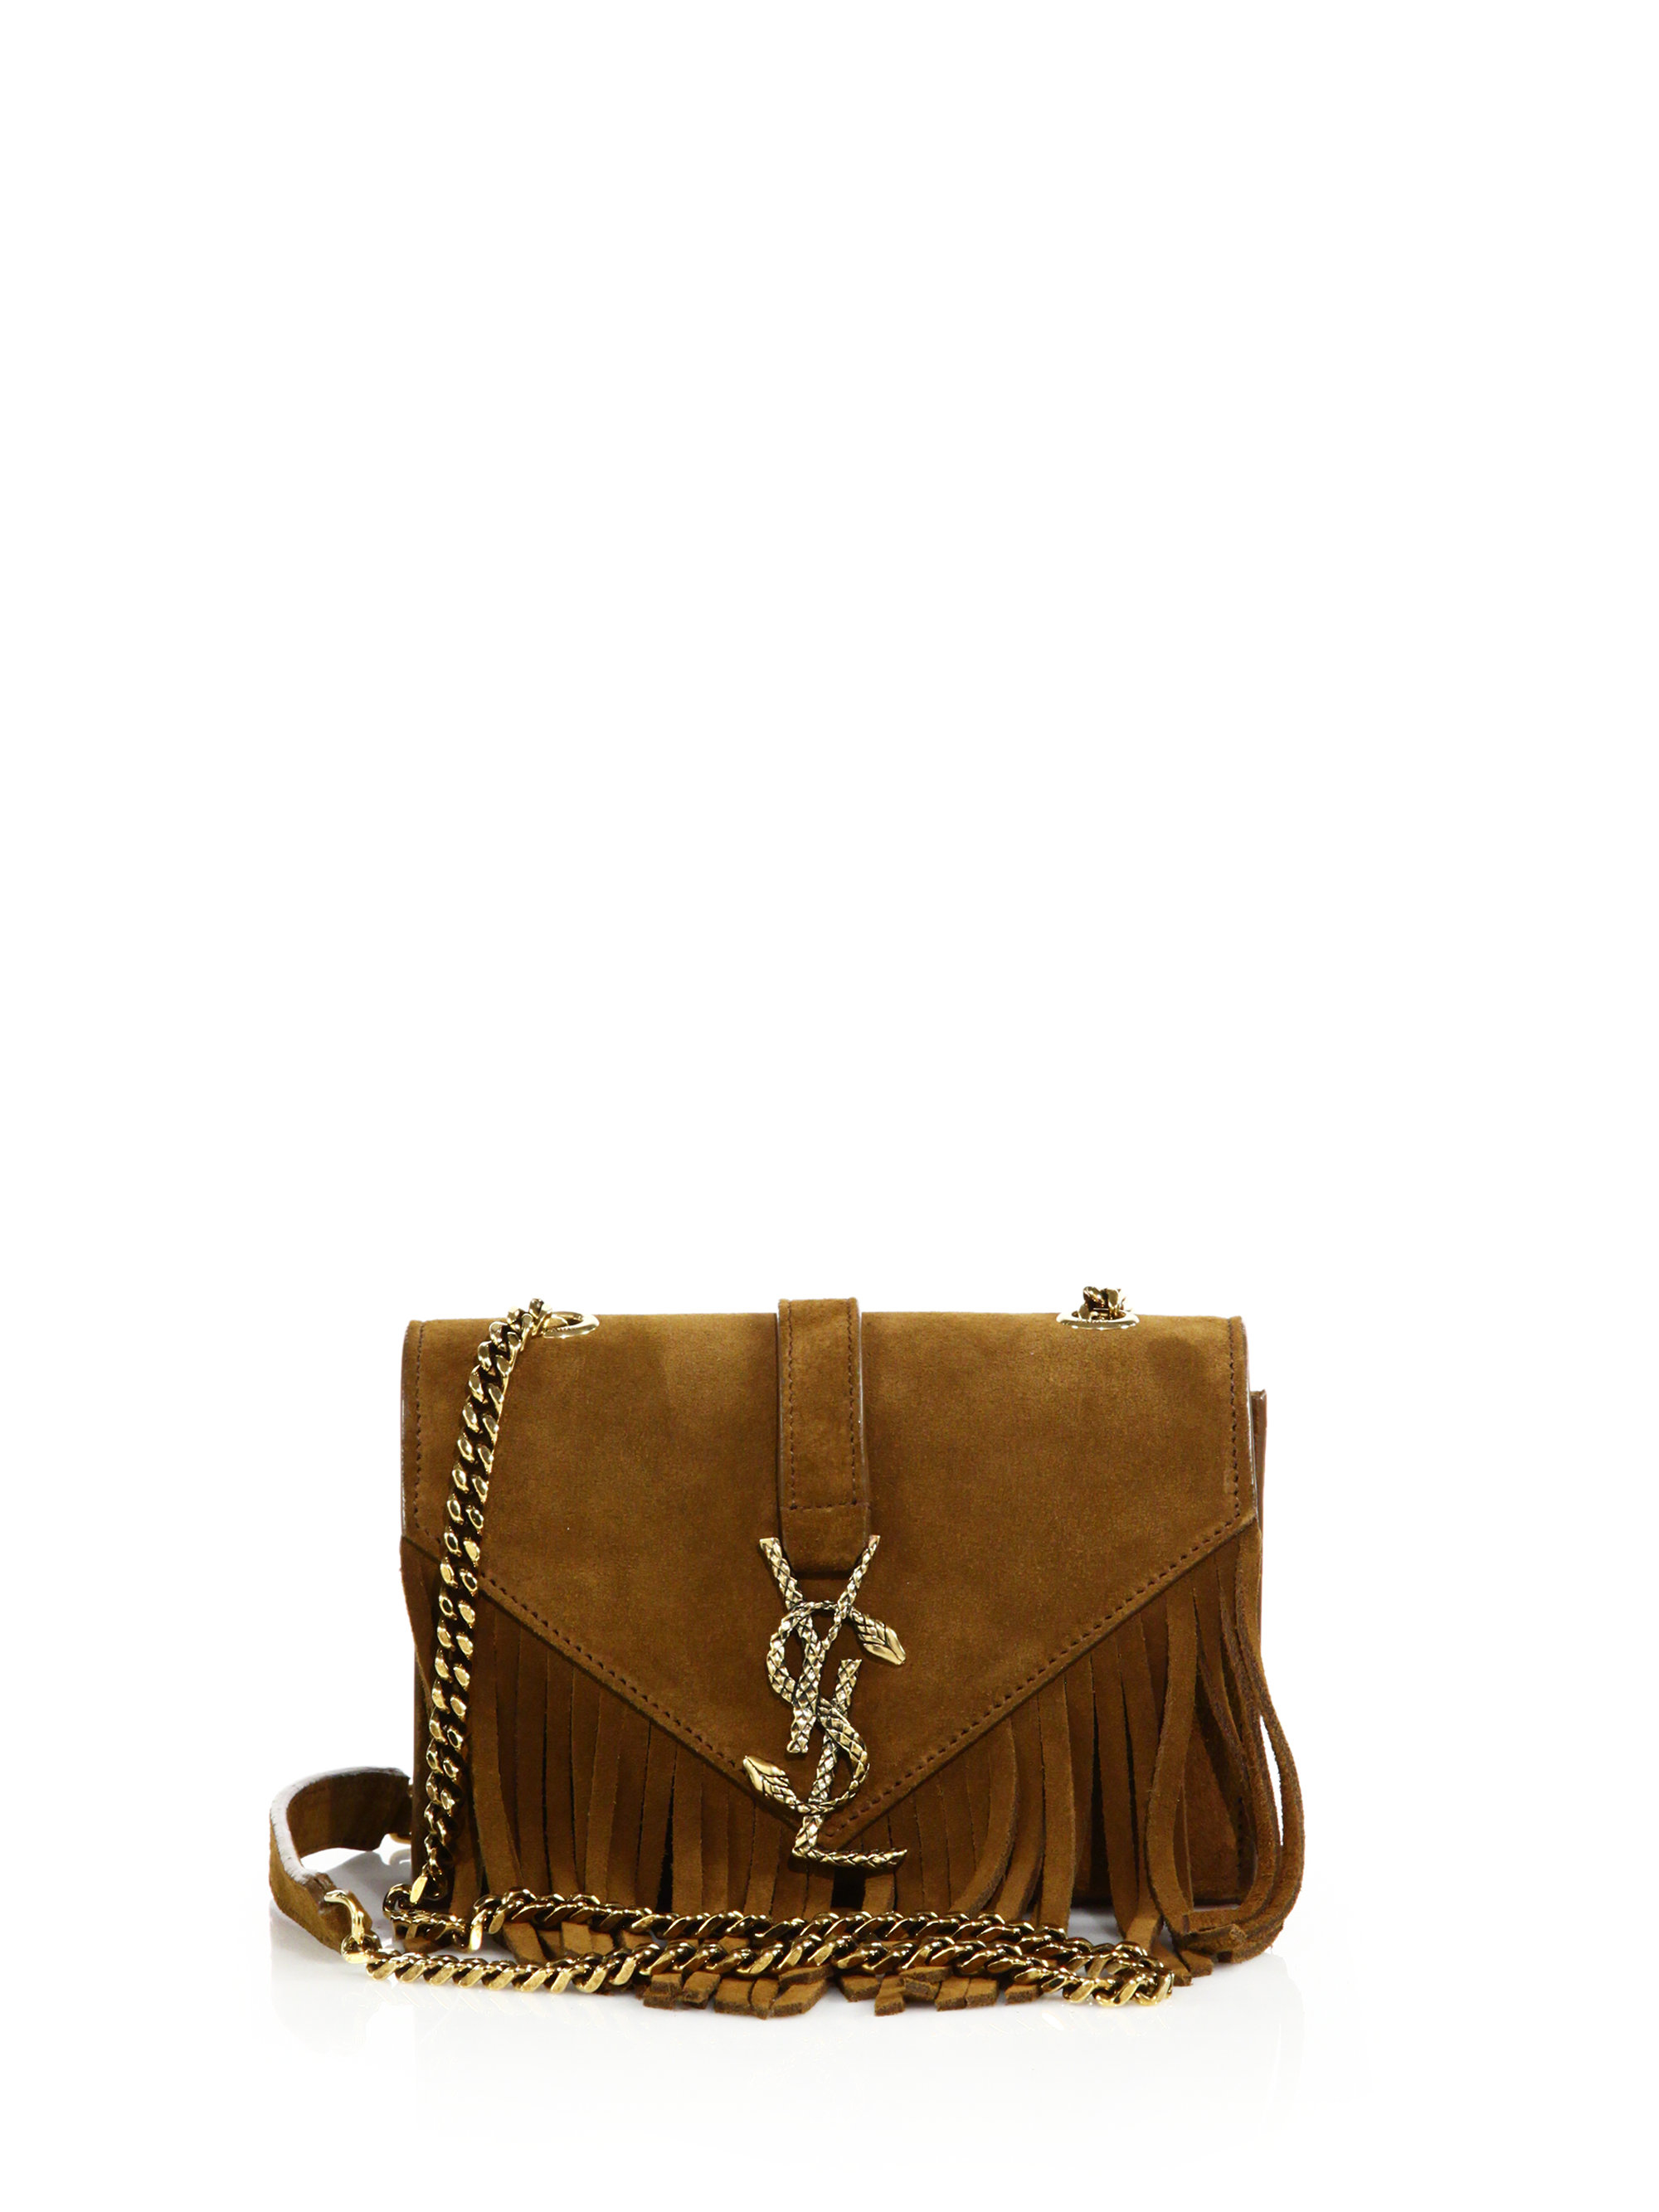 Saint Laurent Baby Serpent Fringed Suede Chain Crossbody Bag in Brown | Lyst